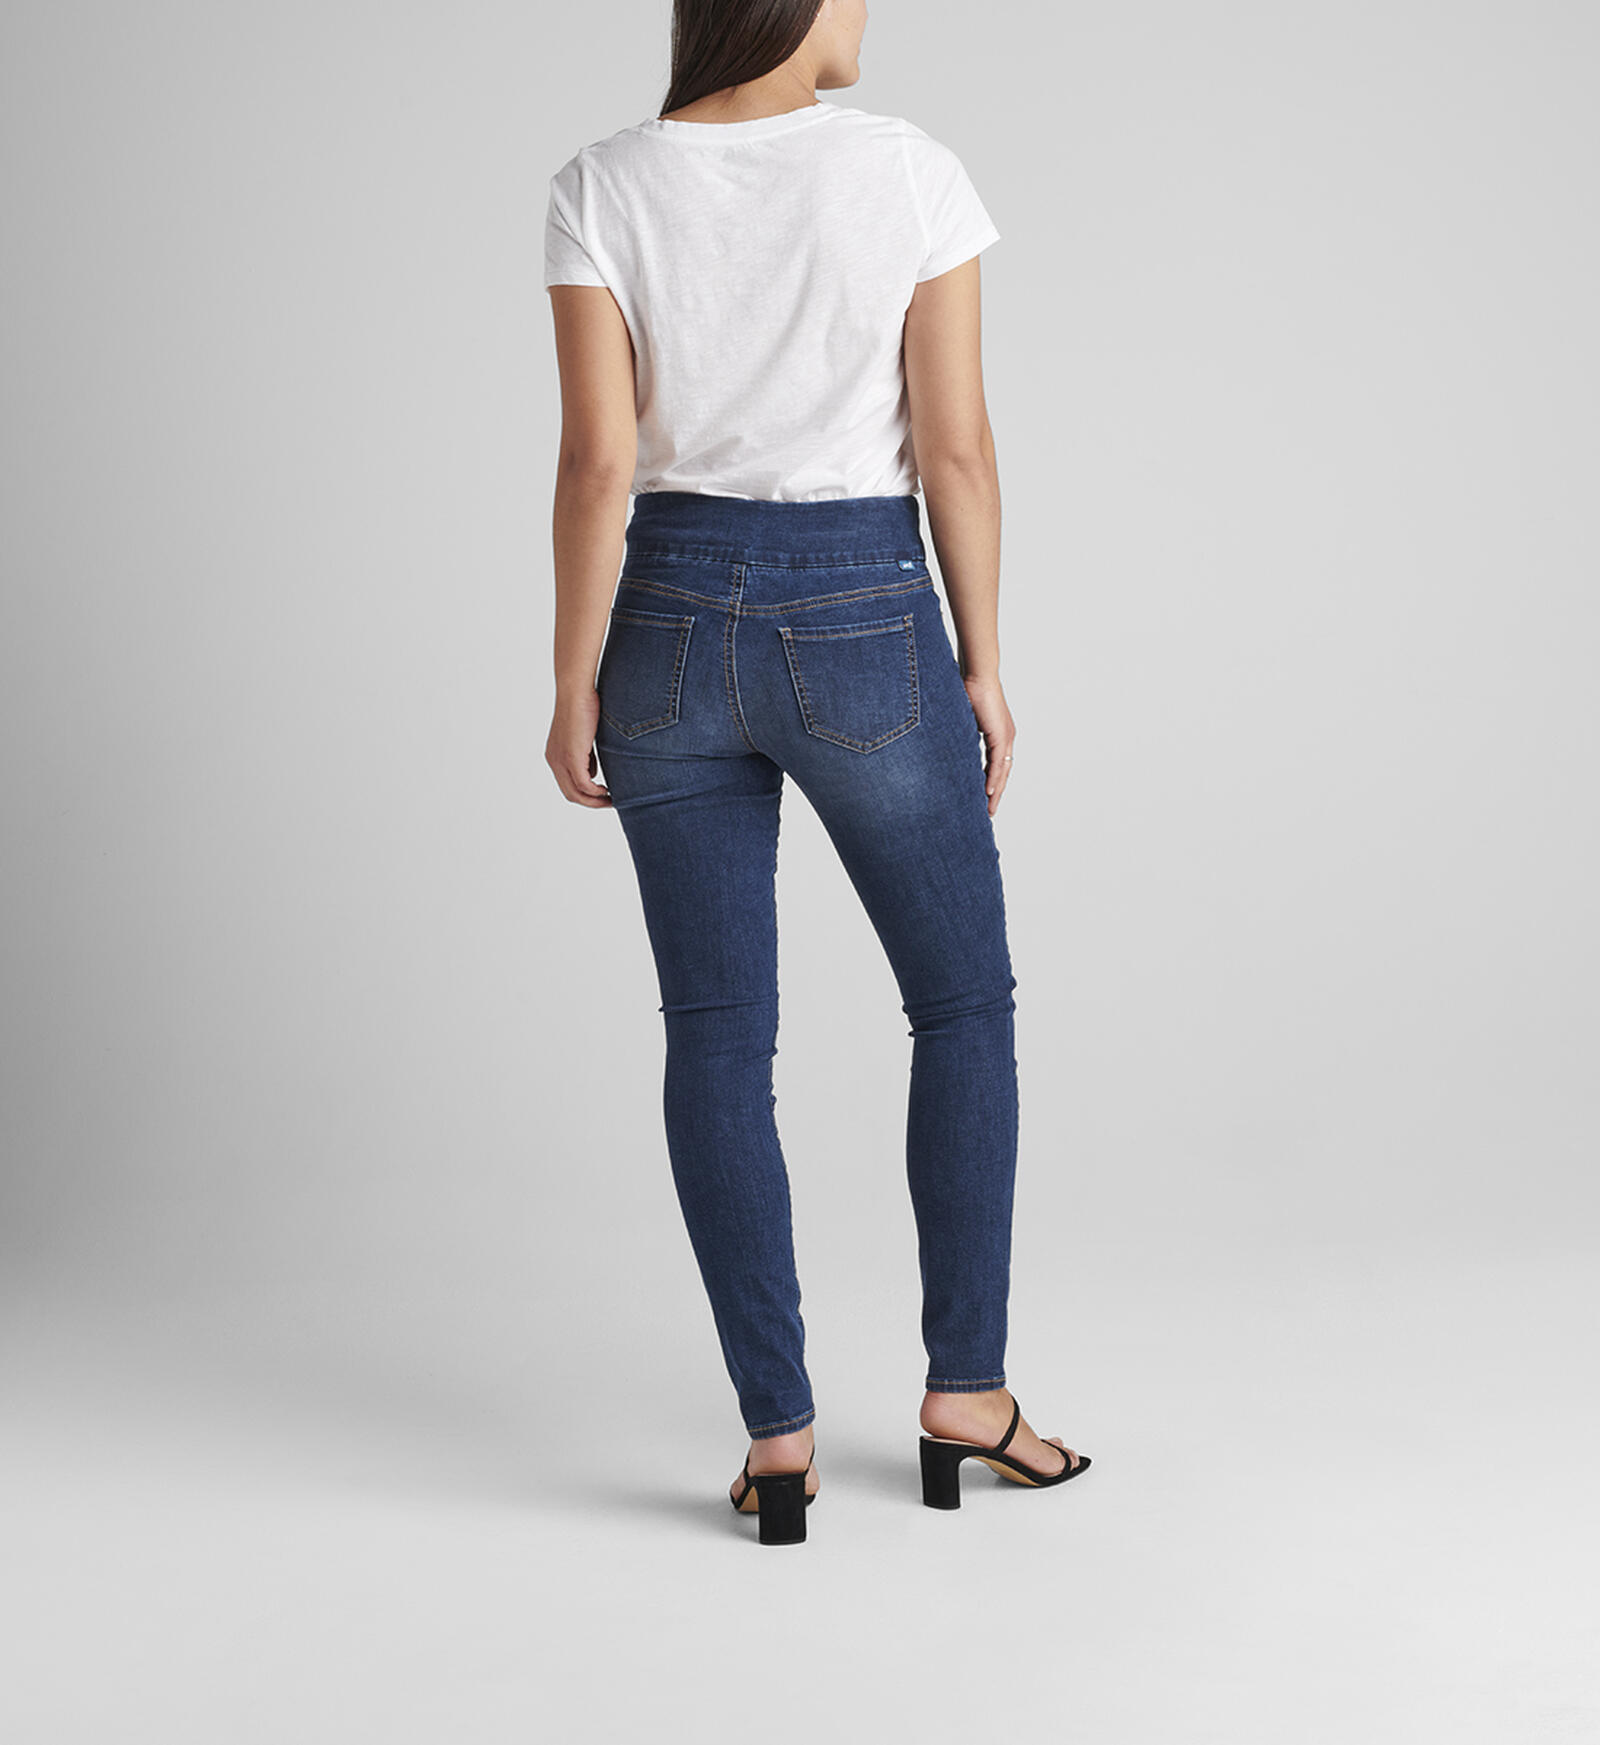 Buy Nora Mid Rise Skinny Pull-On Jeans for USD 69.00